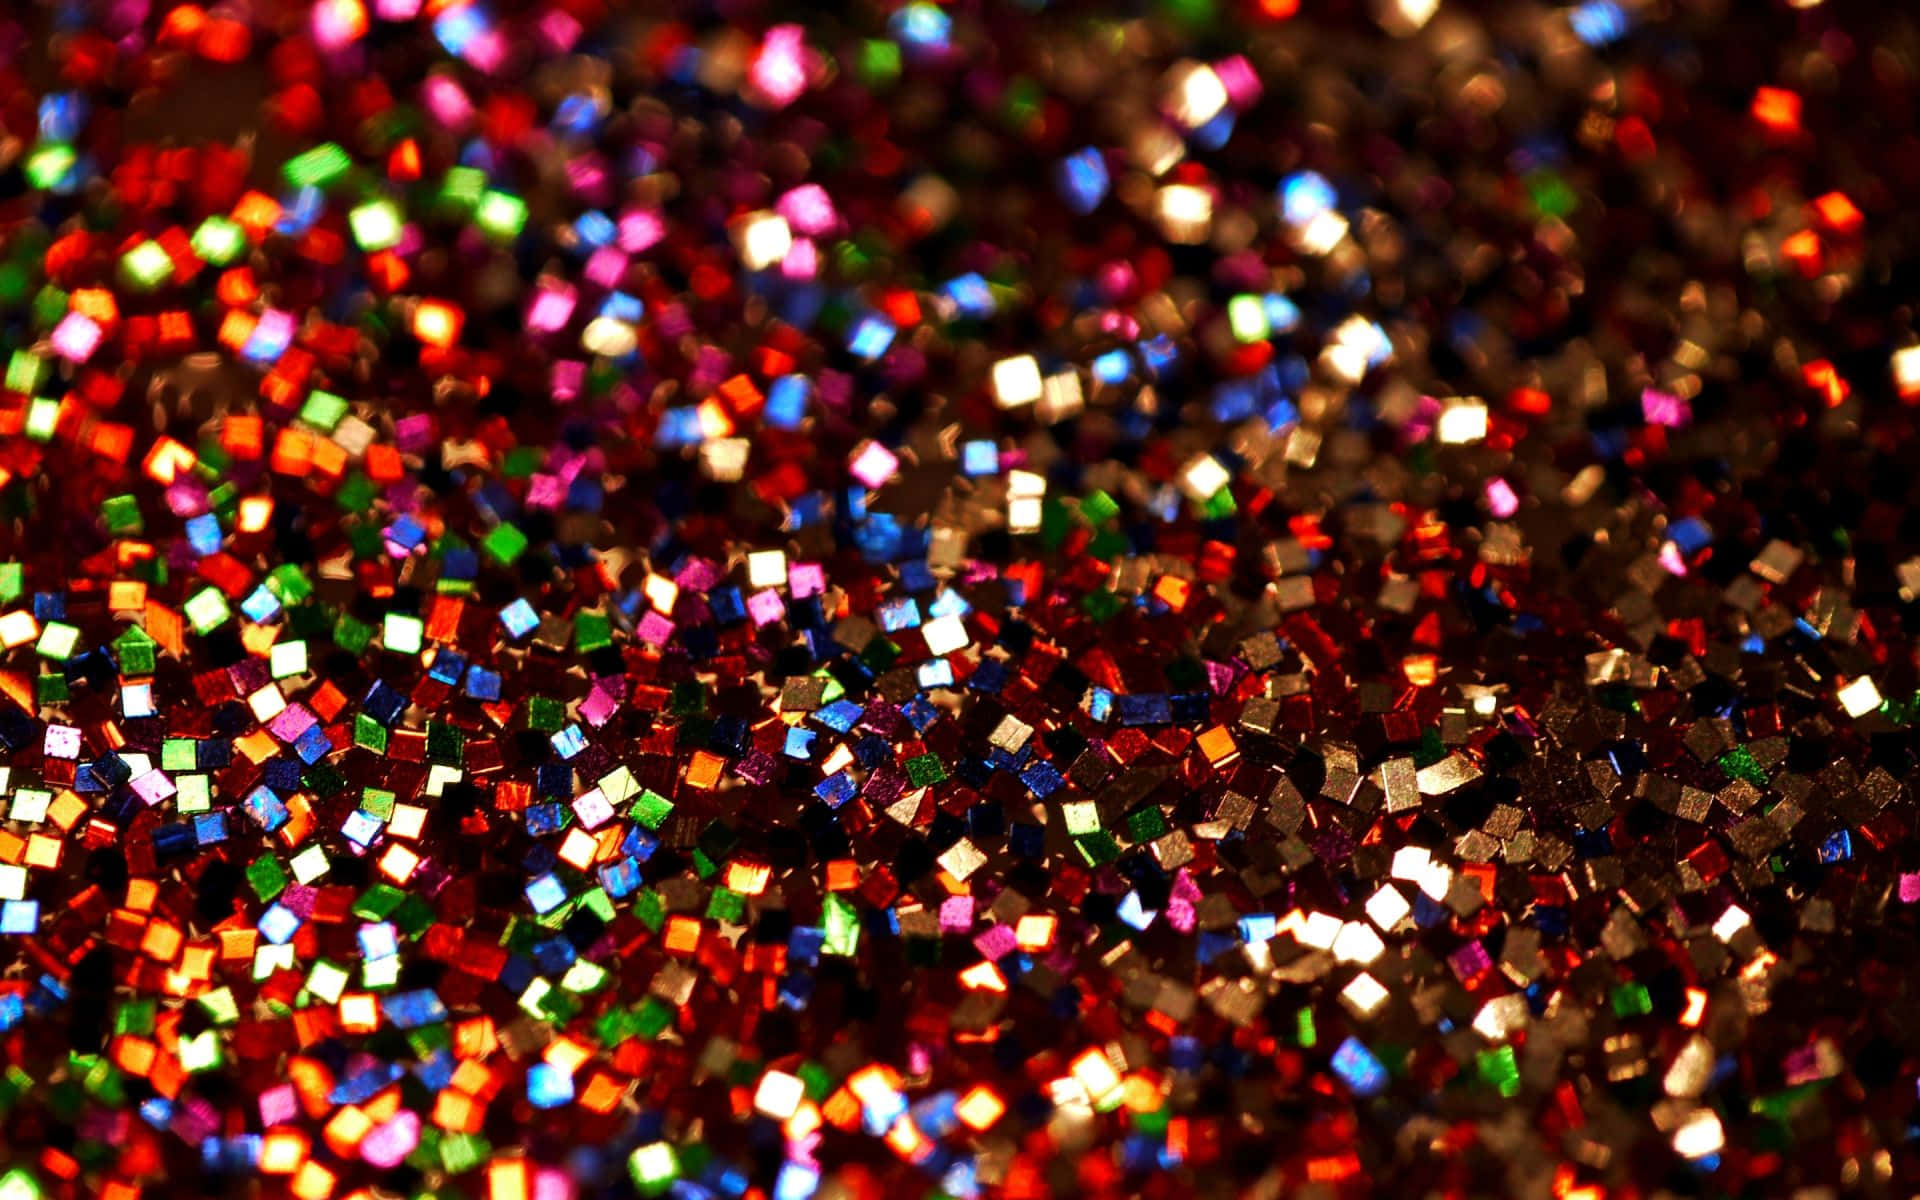 "Glimmer and Shine with this Sparkly Background"